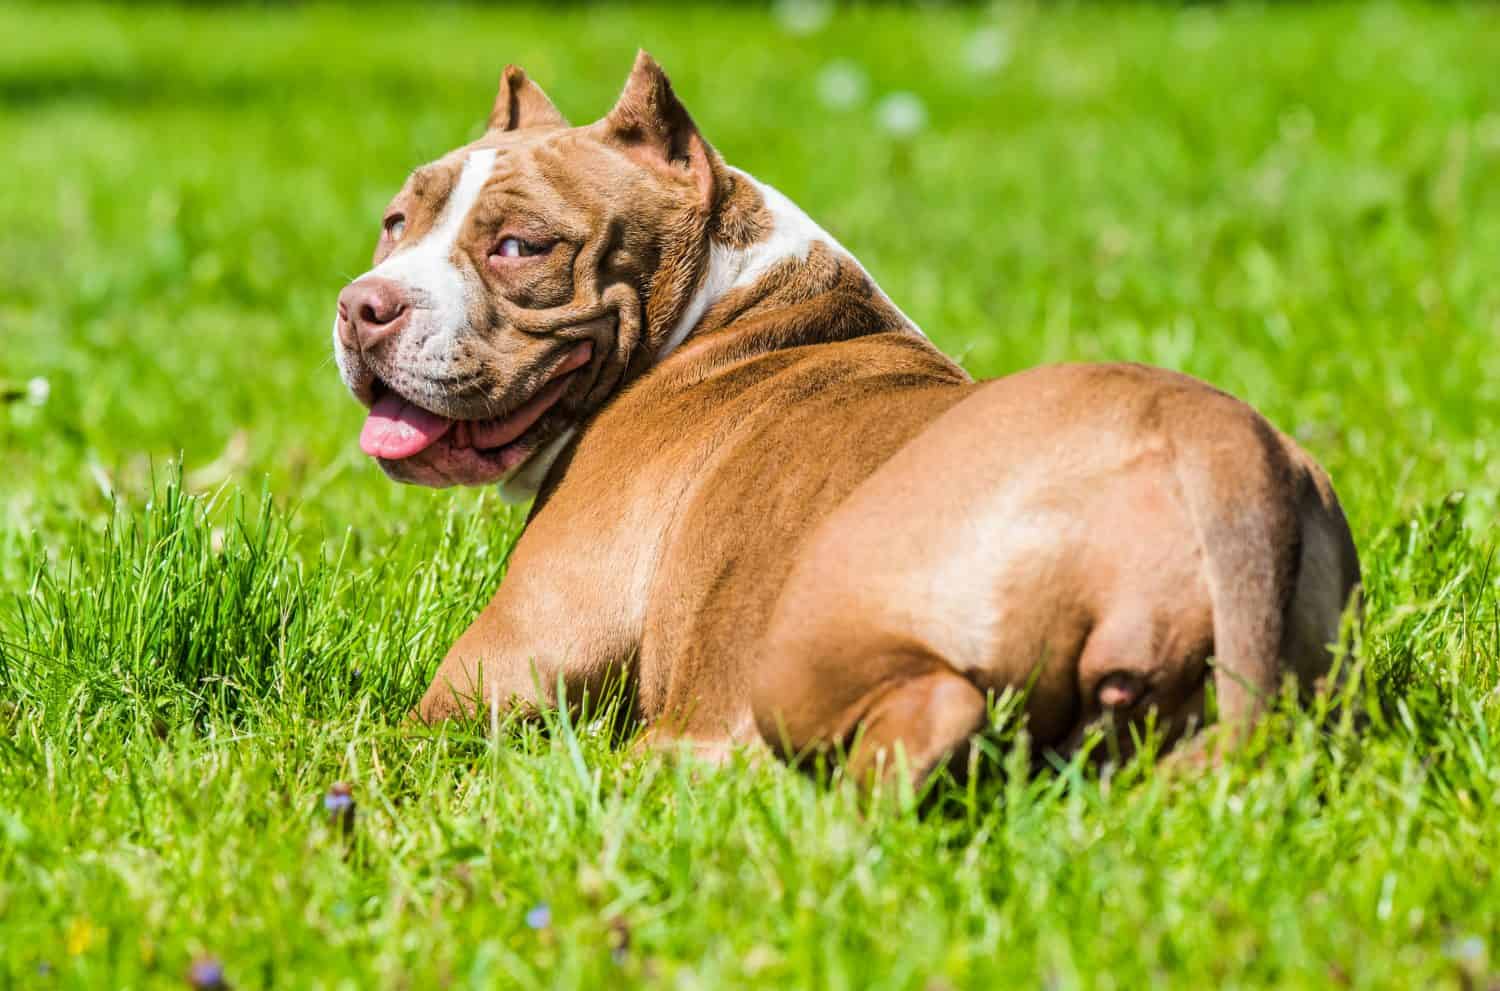 Chocolate brown color American Bully dog is on green grass. Medium sized dog with a muscular body